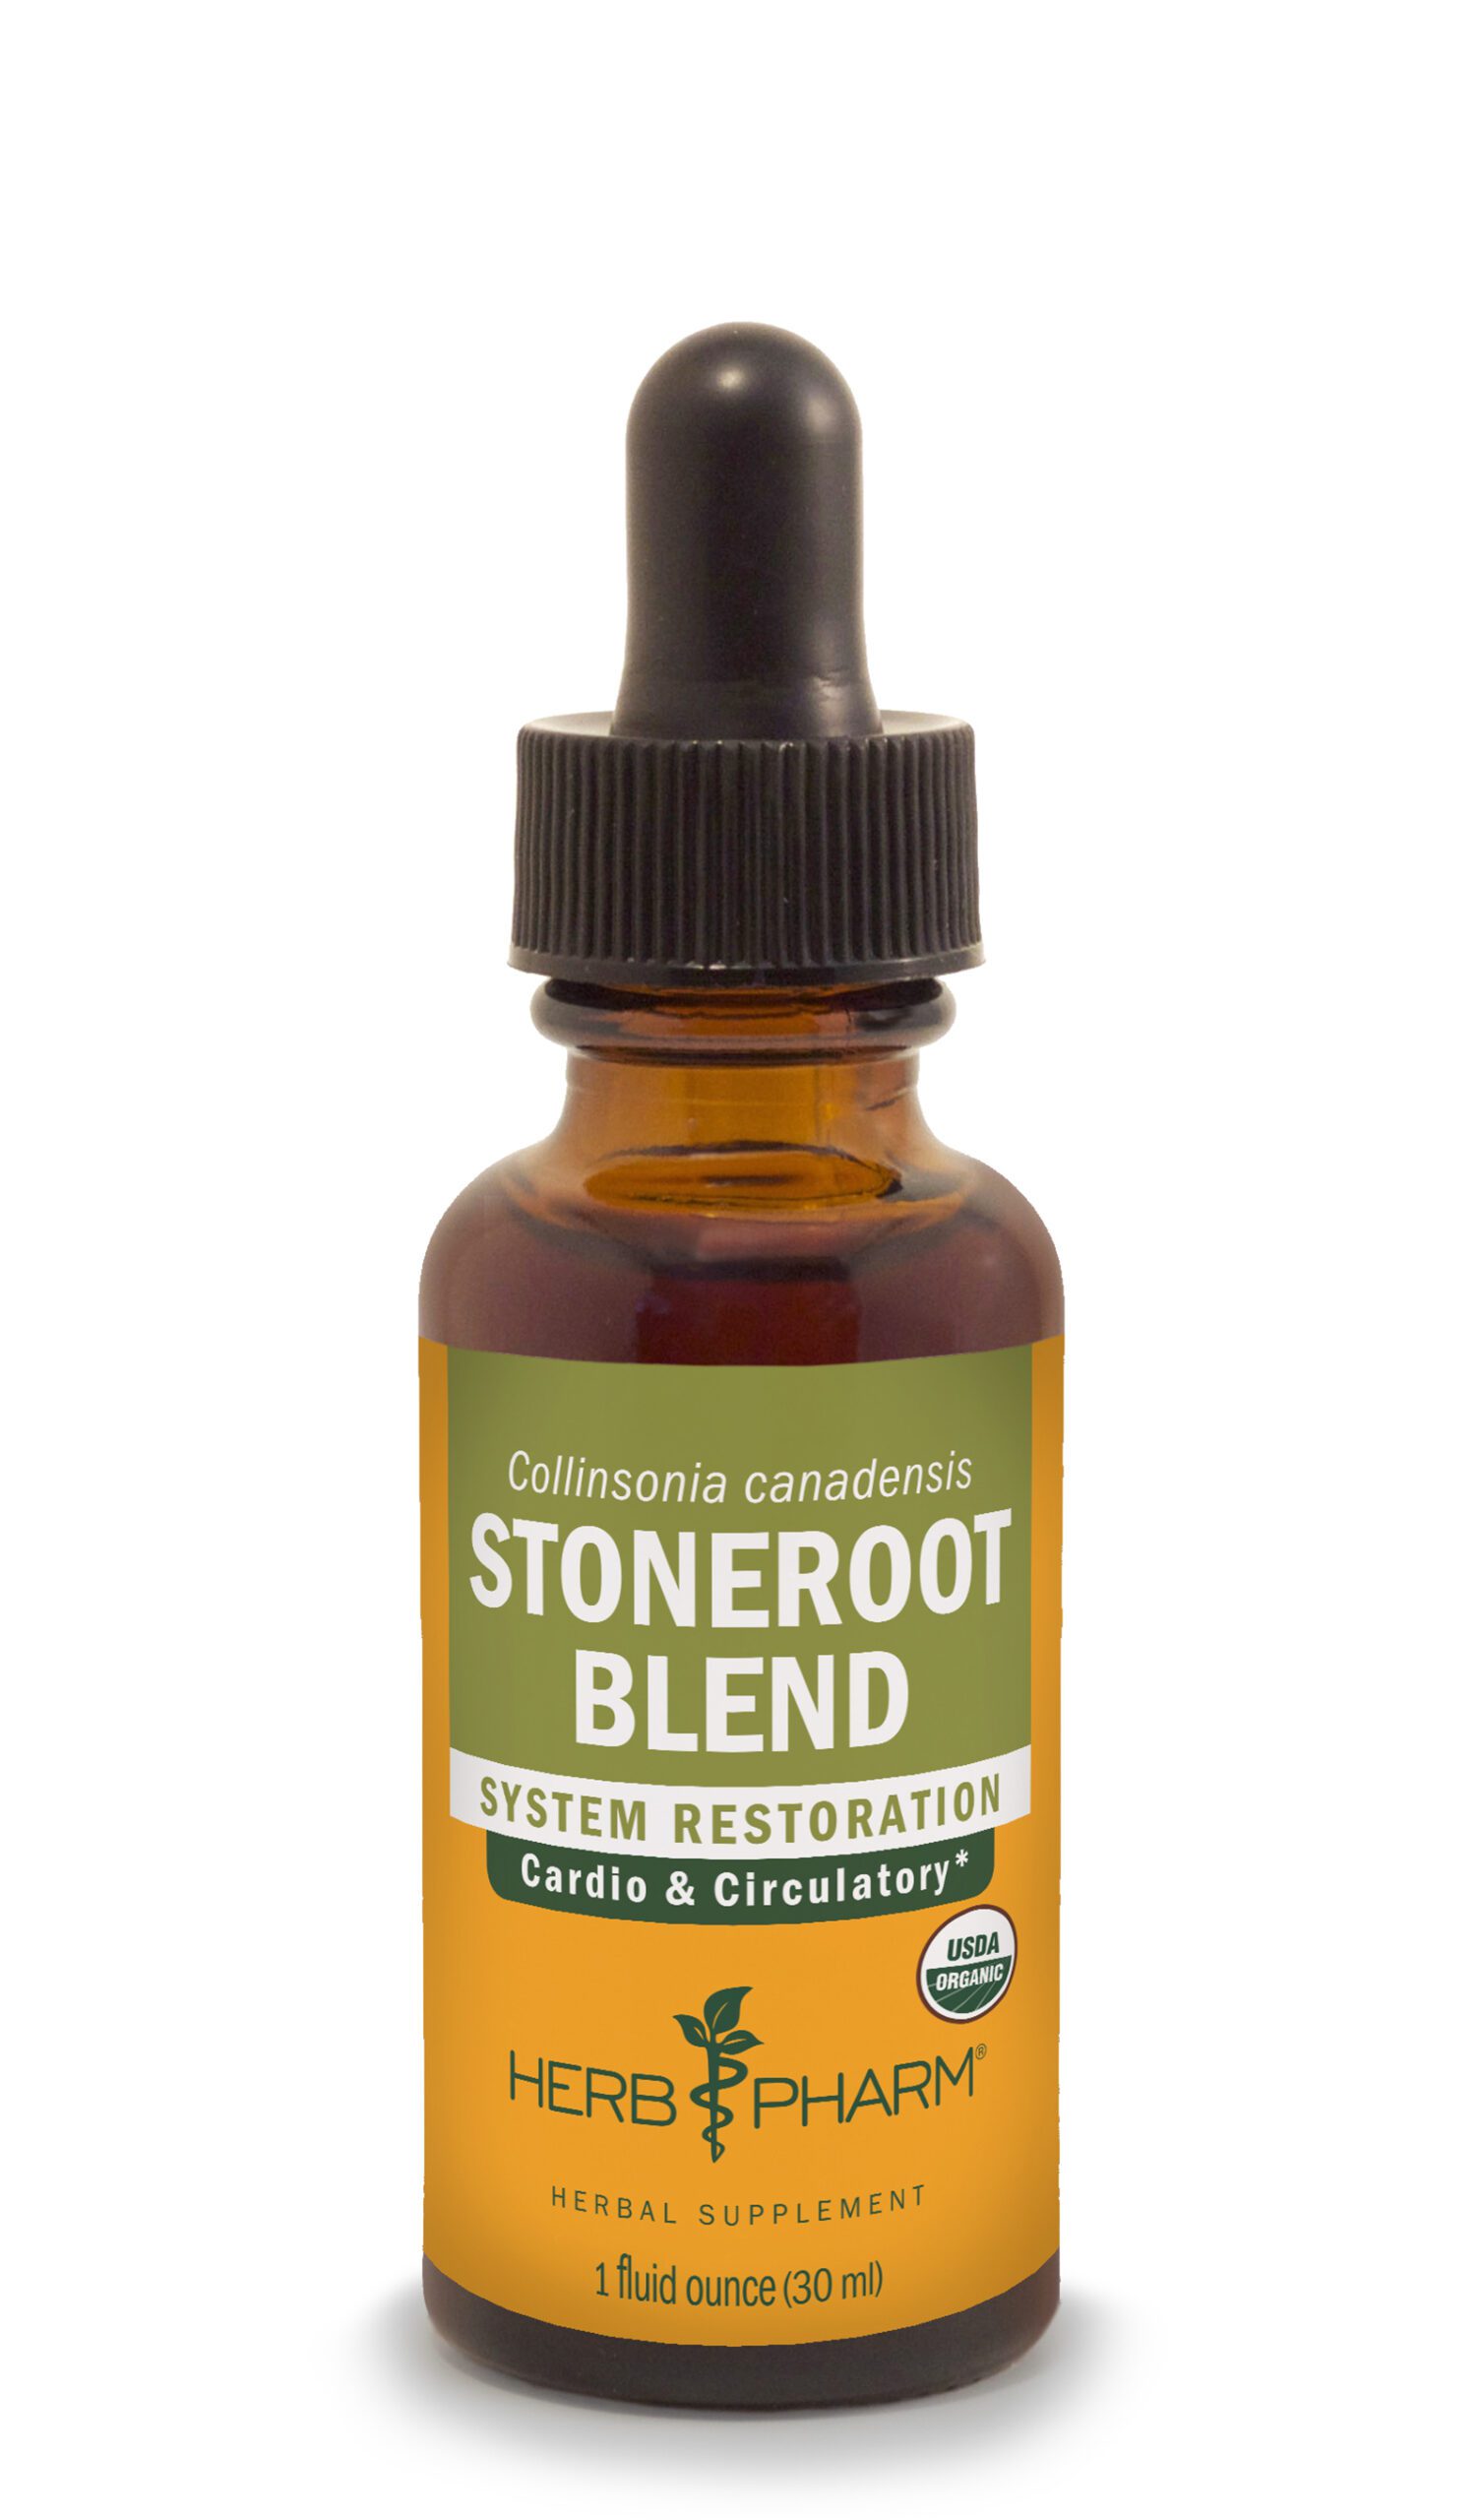 Product Listing Image for Herb Pharm Stoneroot Blend Tincture 1oz